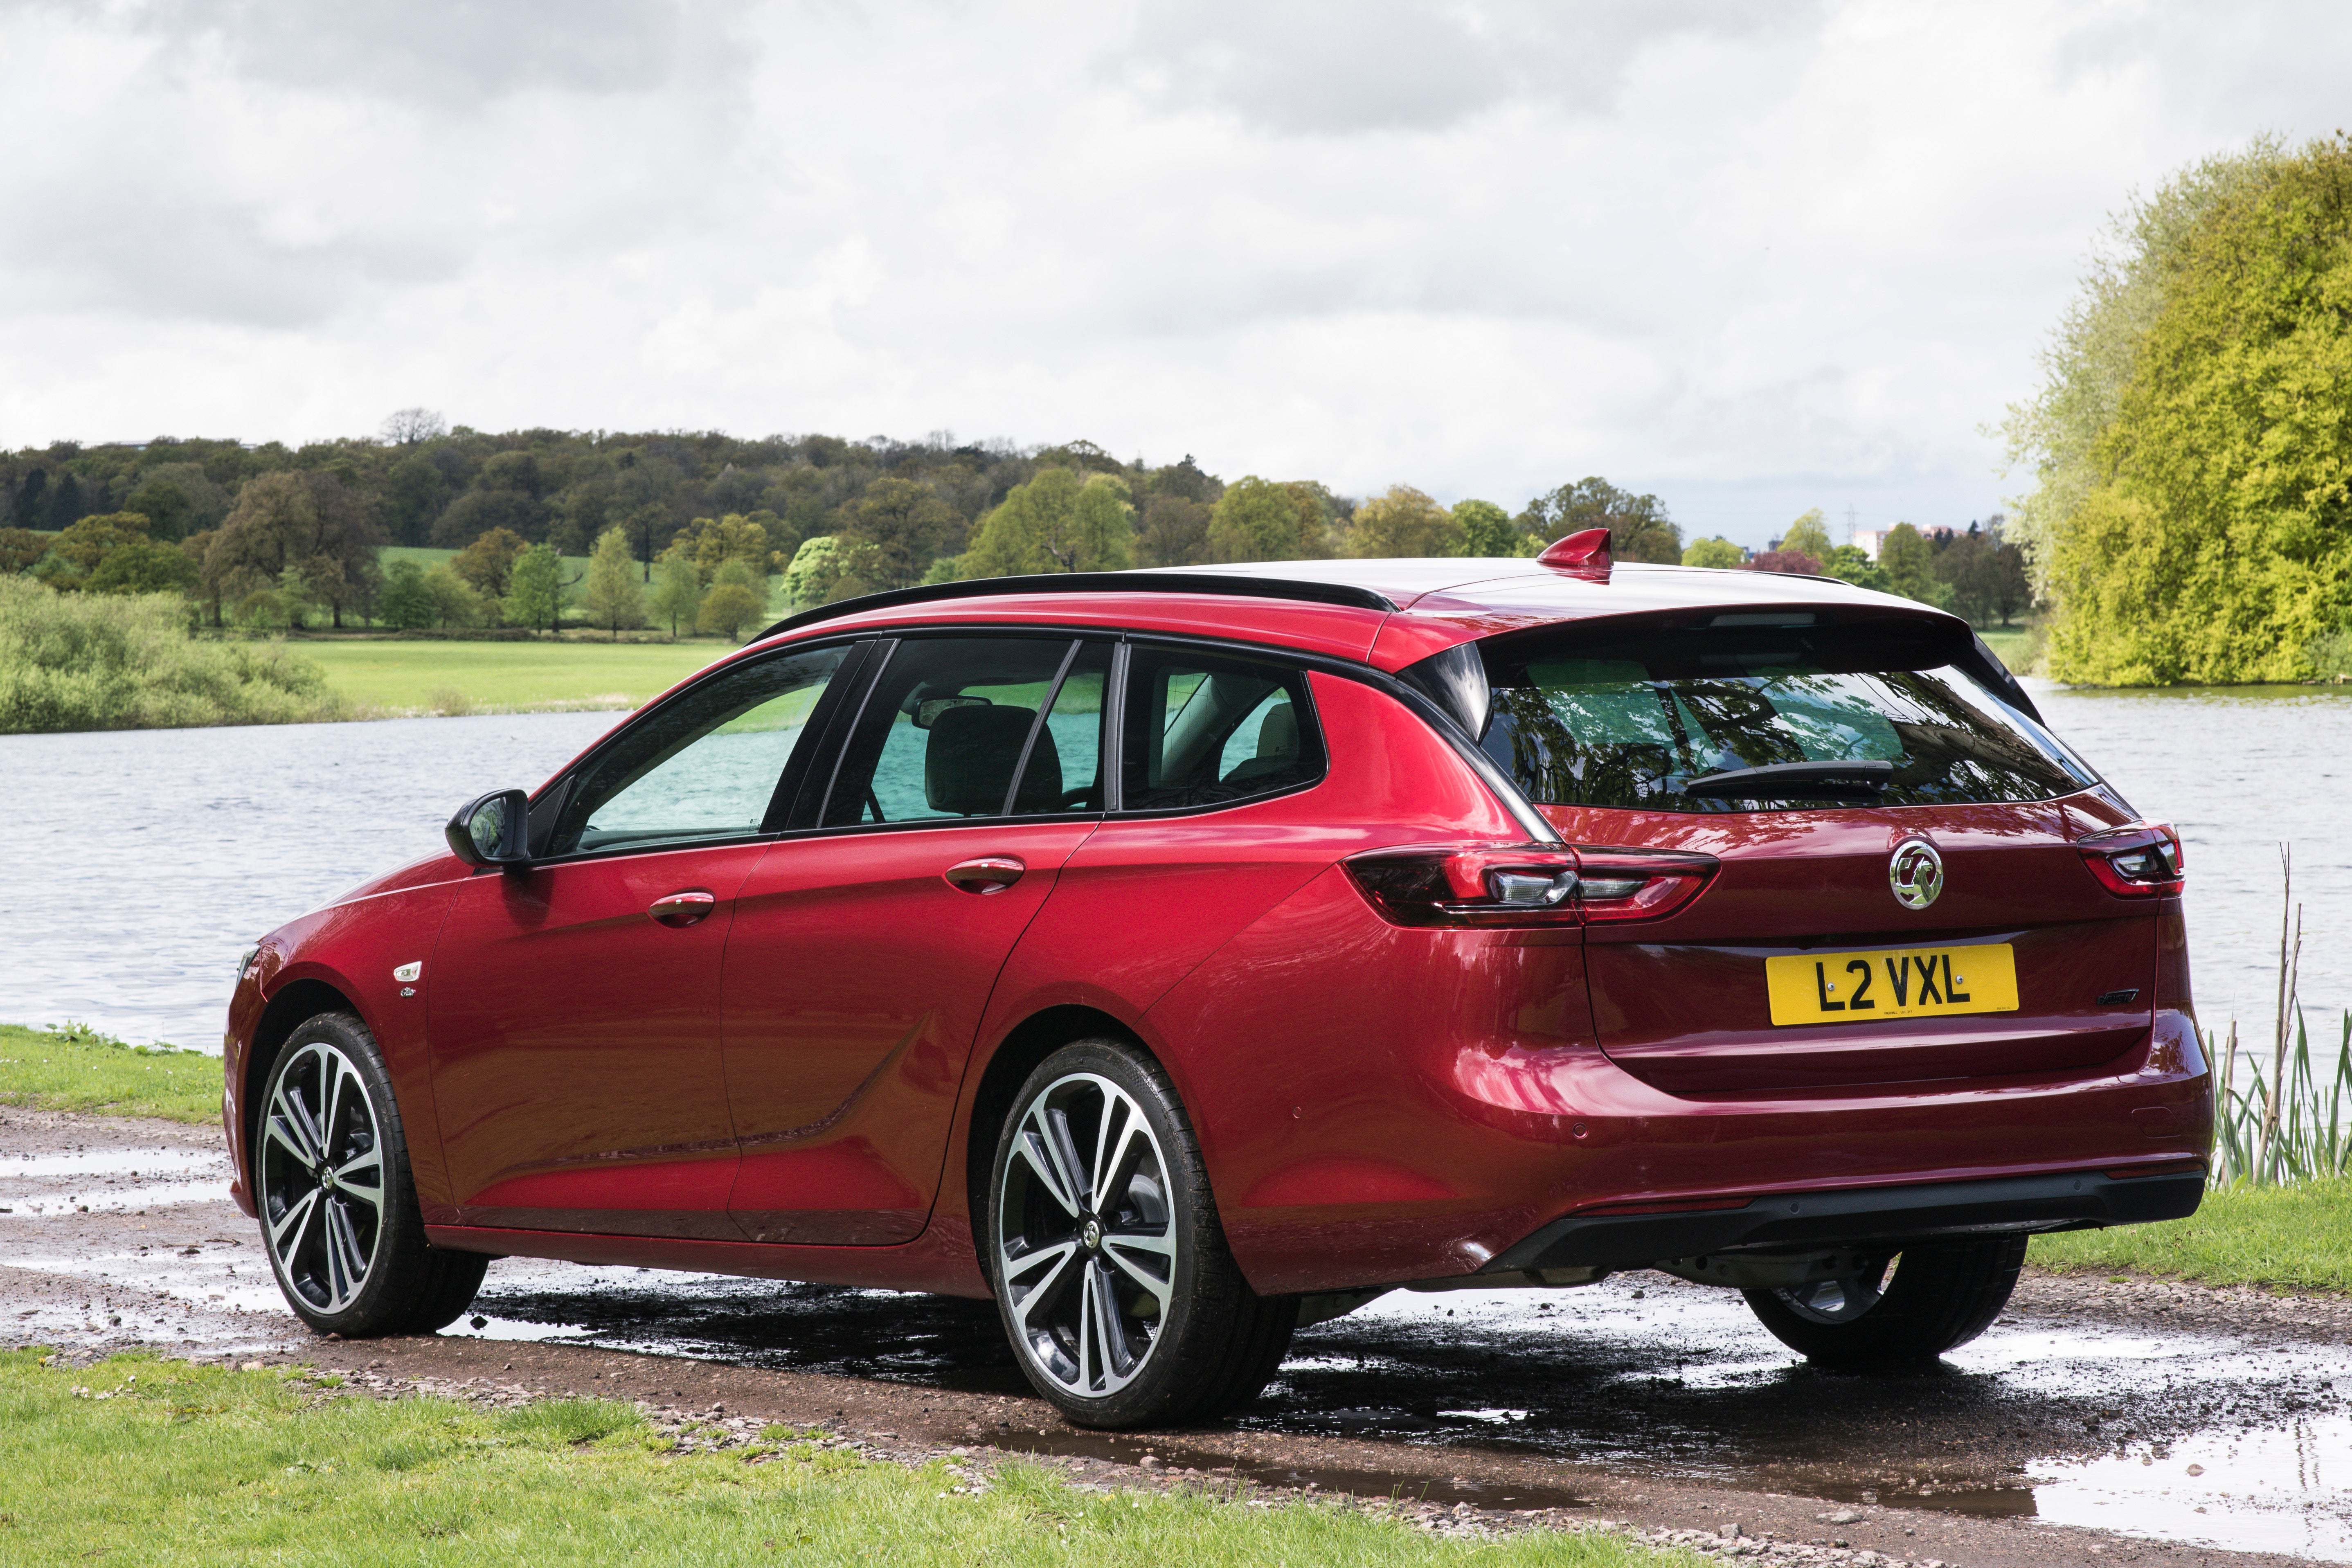 Vauxhall Insignia Sports Tourer Rear Side View